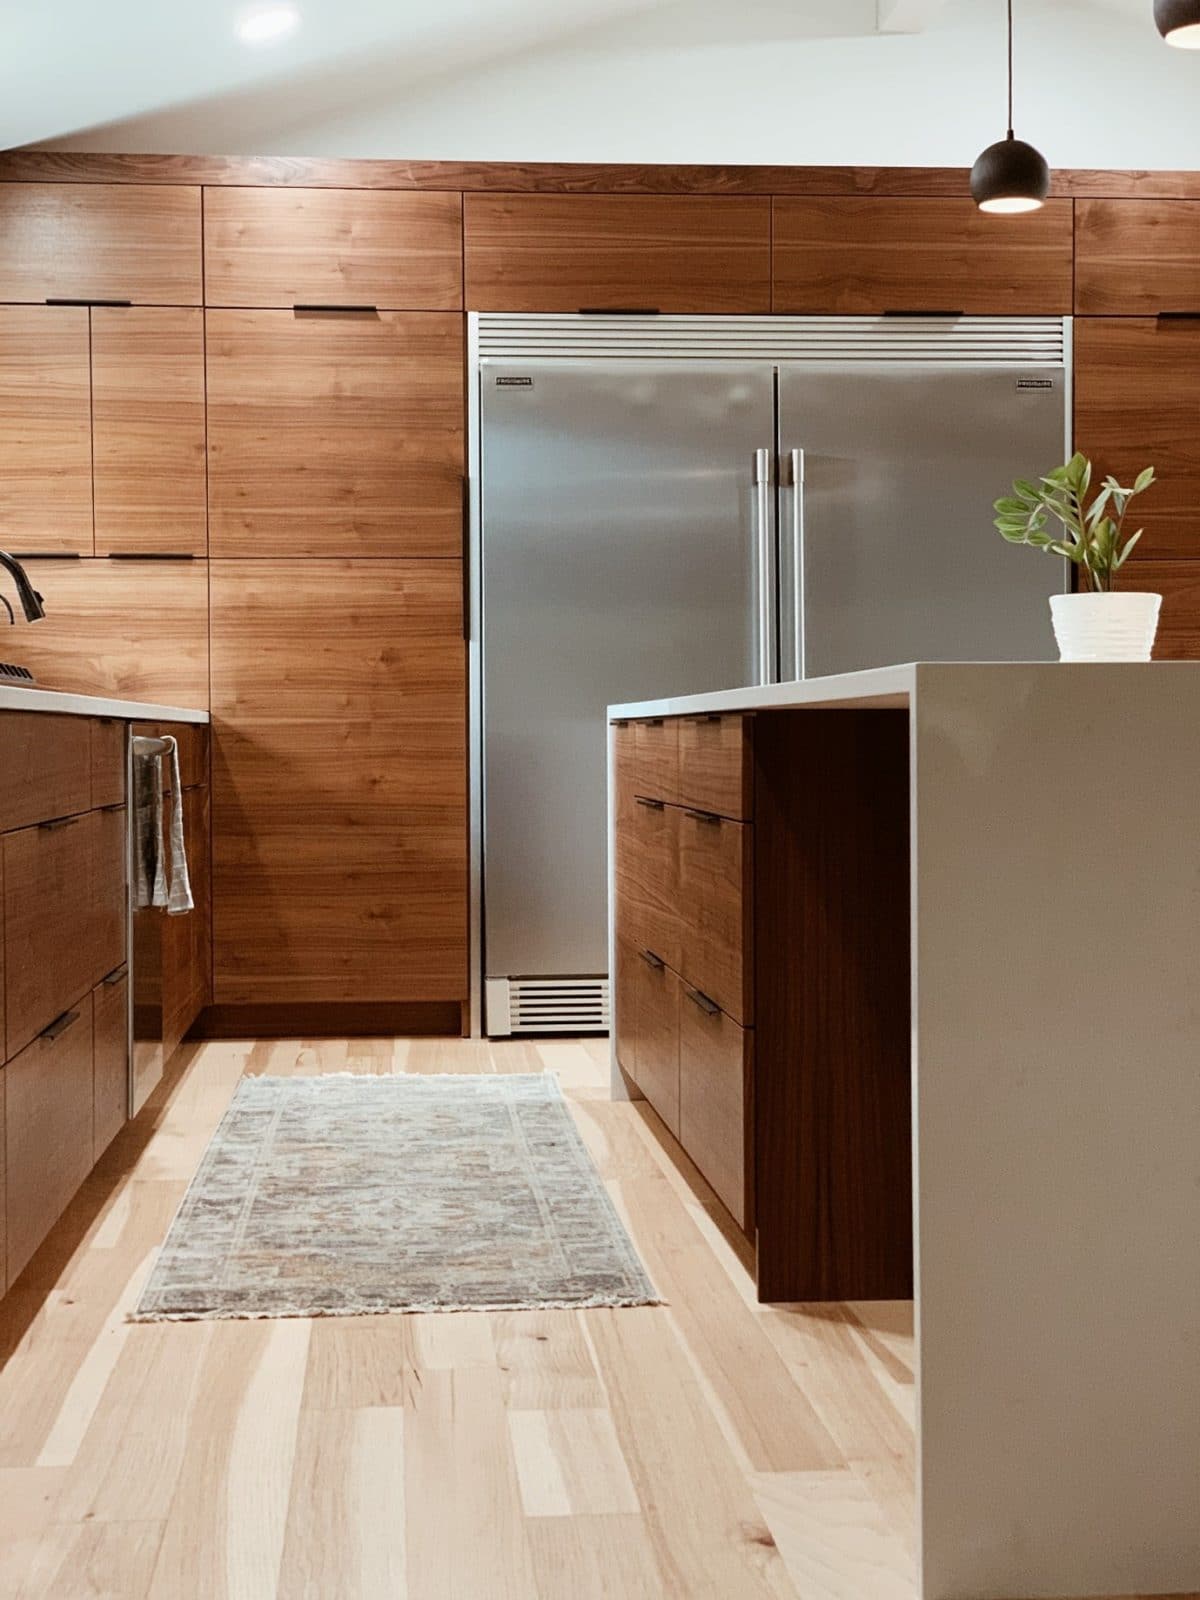 39 Timber kitchen ideas to add warmth and texture